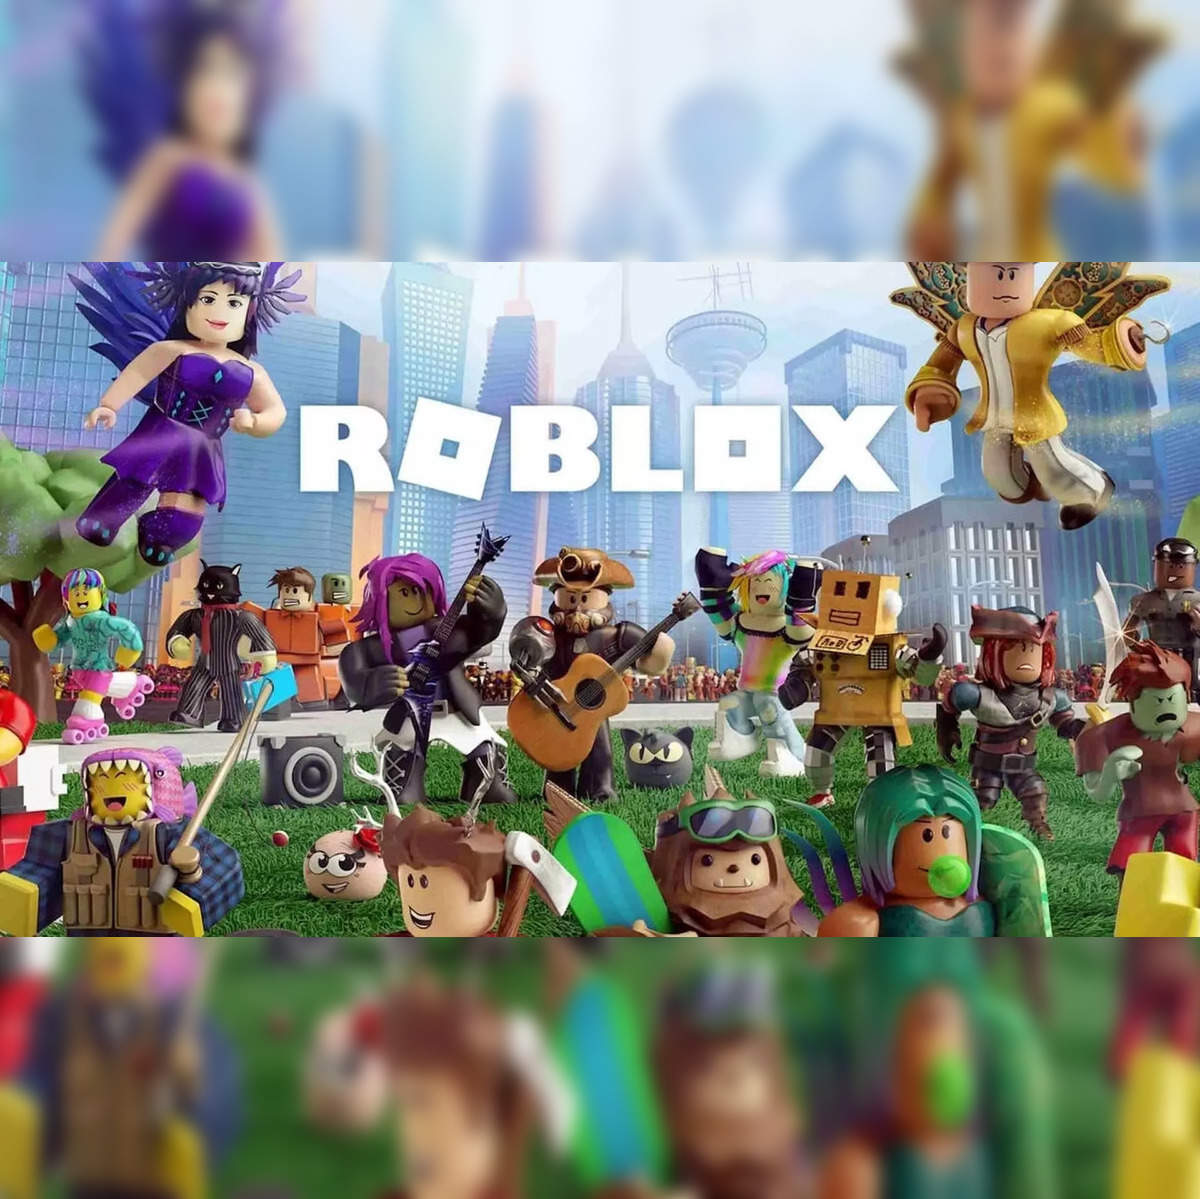 Roblox To Debut On PlayStation With New World Building AI Tools